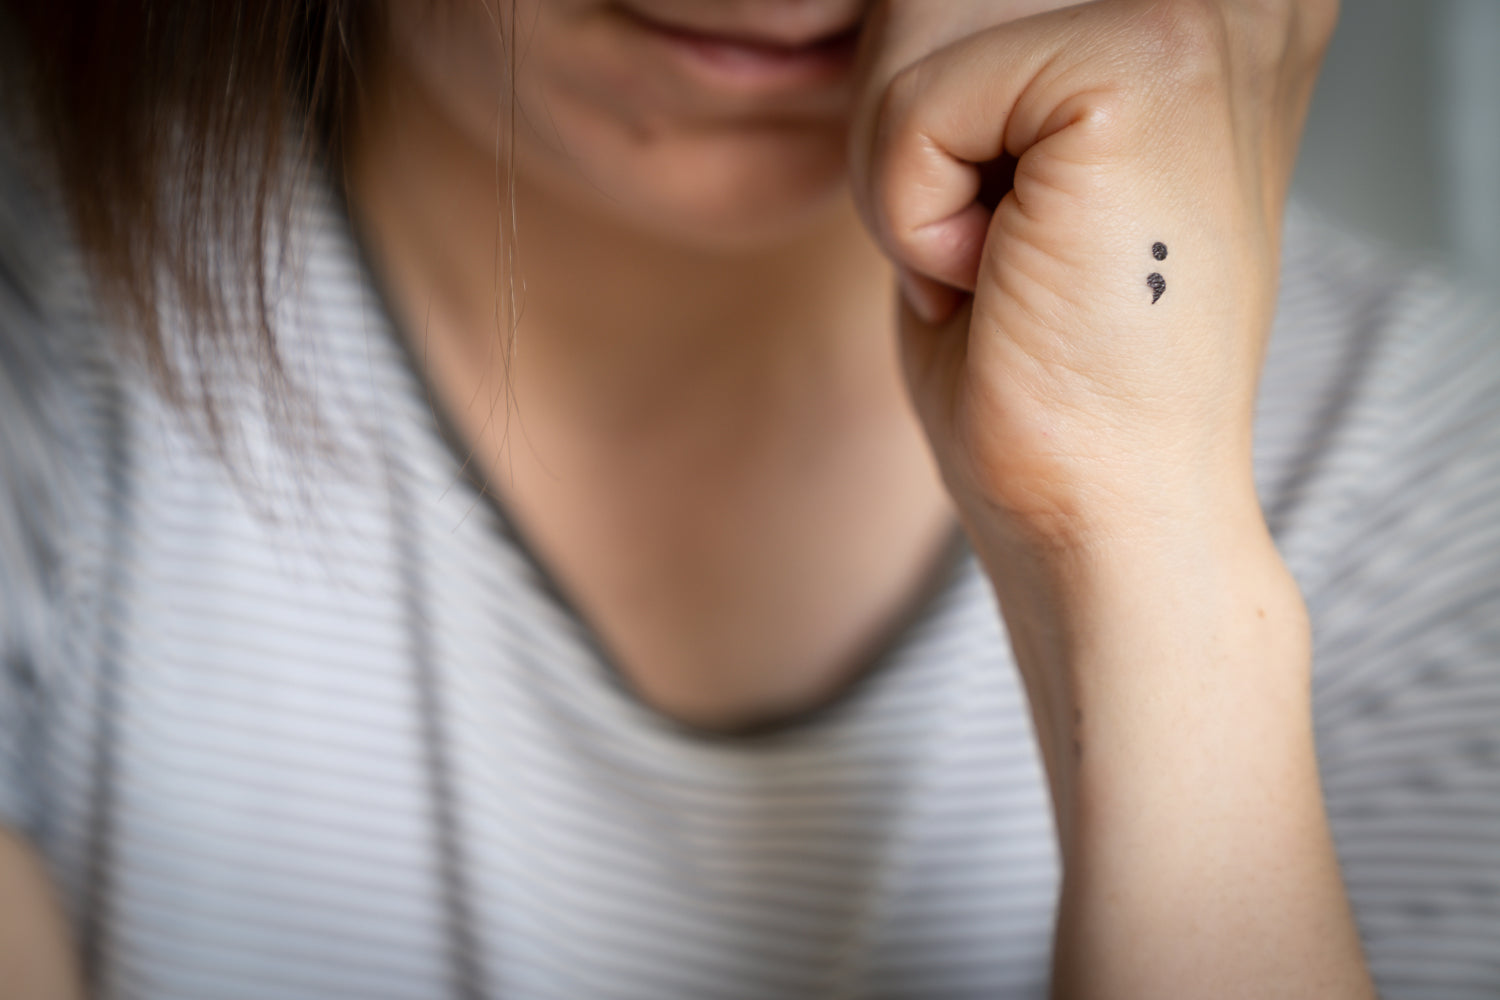 Semicolon tattoo a sign of comfort and reassurance for the depressed The  New Indian Express